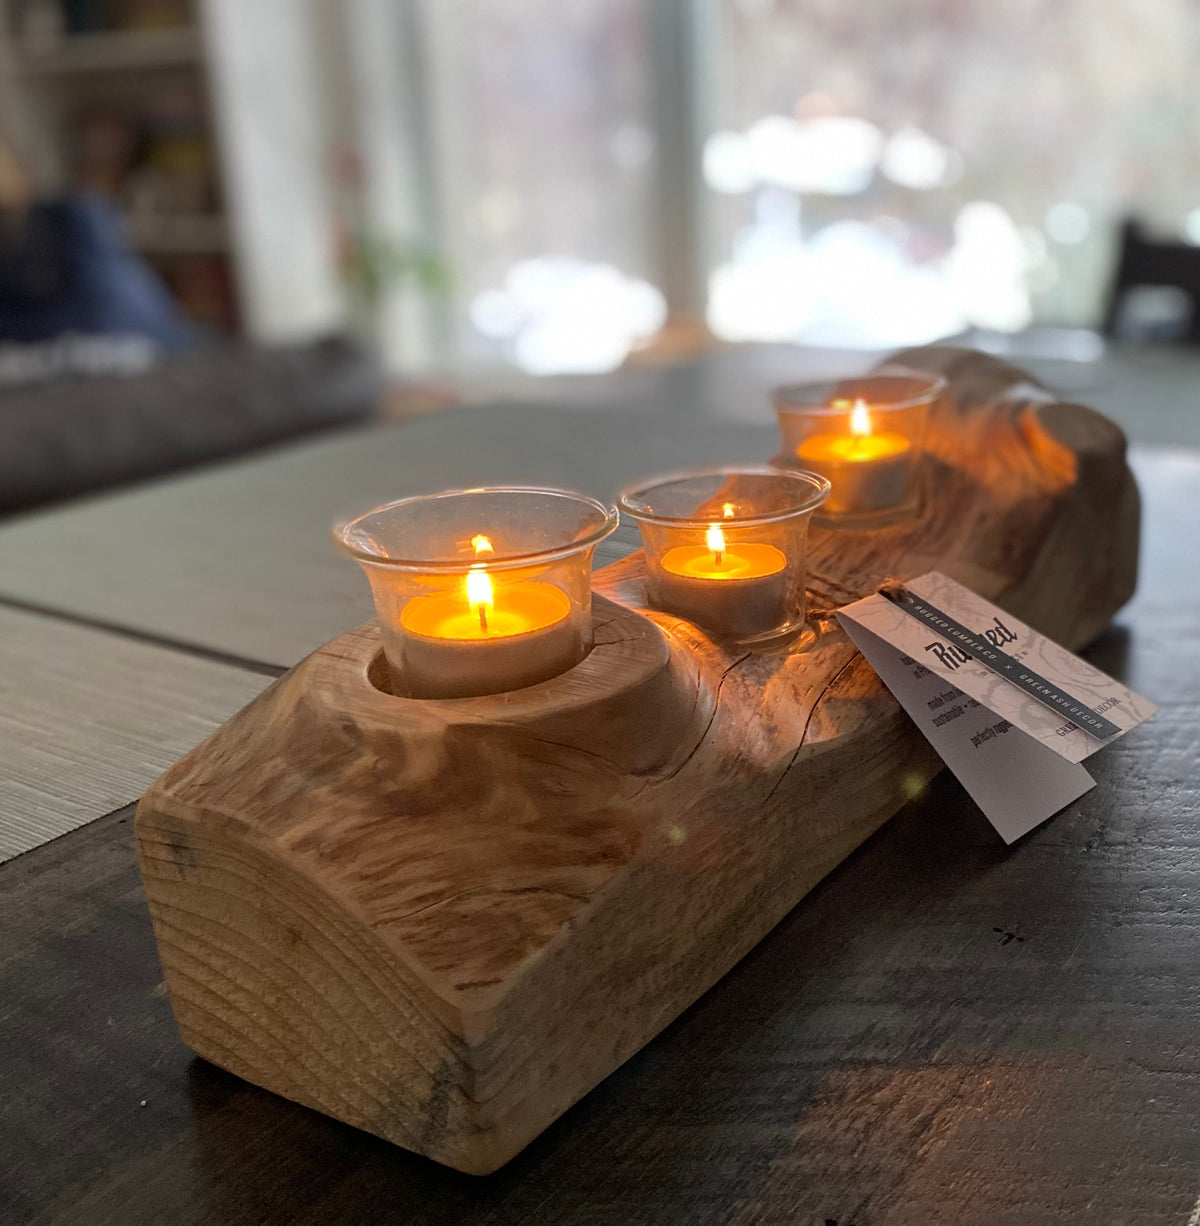 Tea Light Table Centerpiece made with Locally Sourced Sustainable + Reclaimed Wood - Green Ash Decor